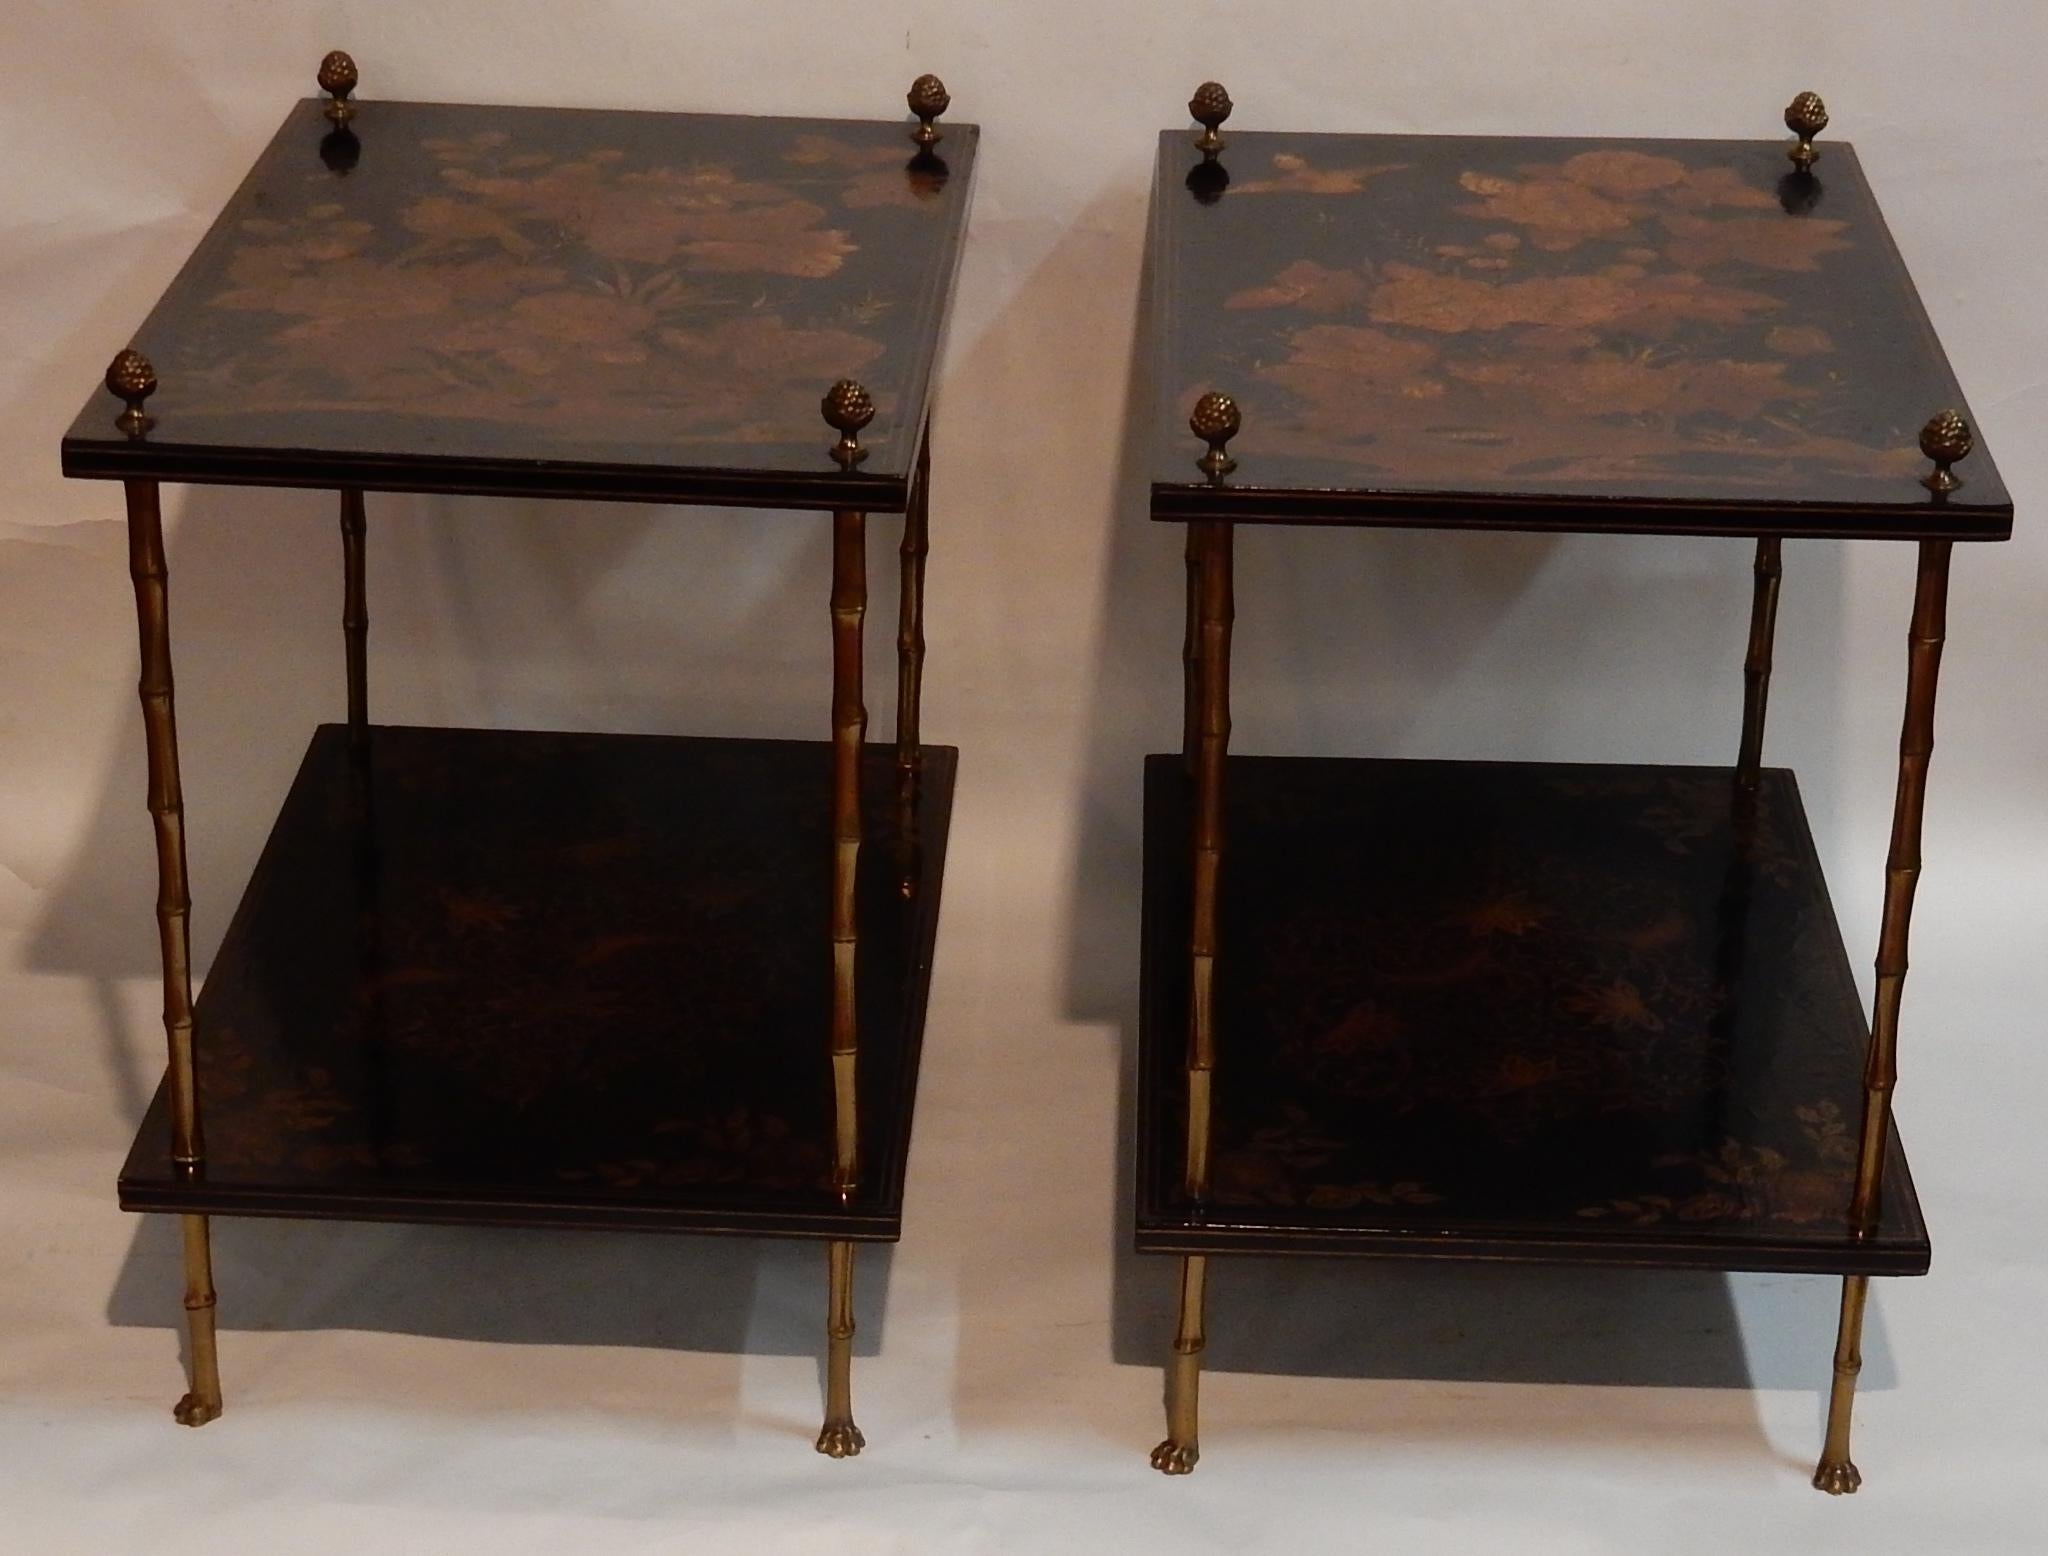 Neoclassical 1950 Pair of Tables Style Maison Bagués Golden Bronze, Trays China Lacquer